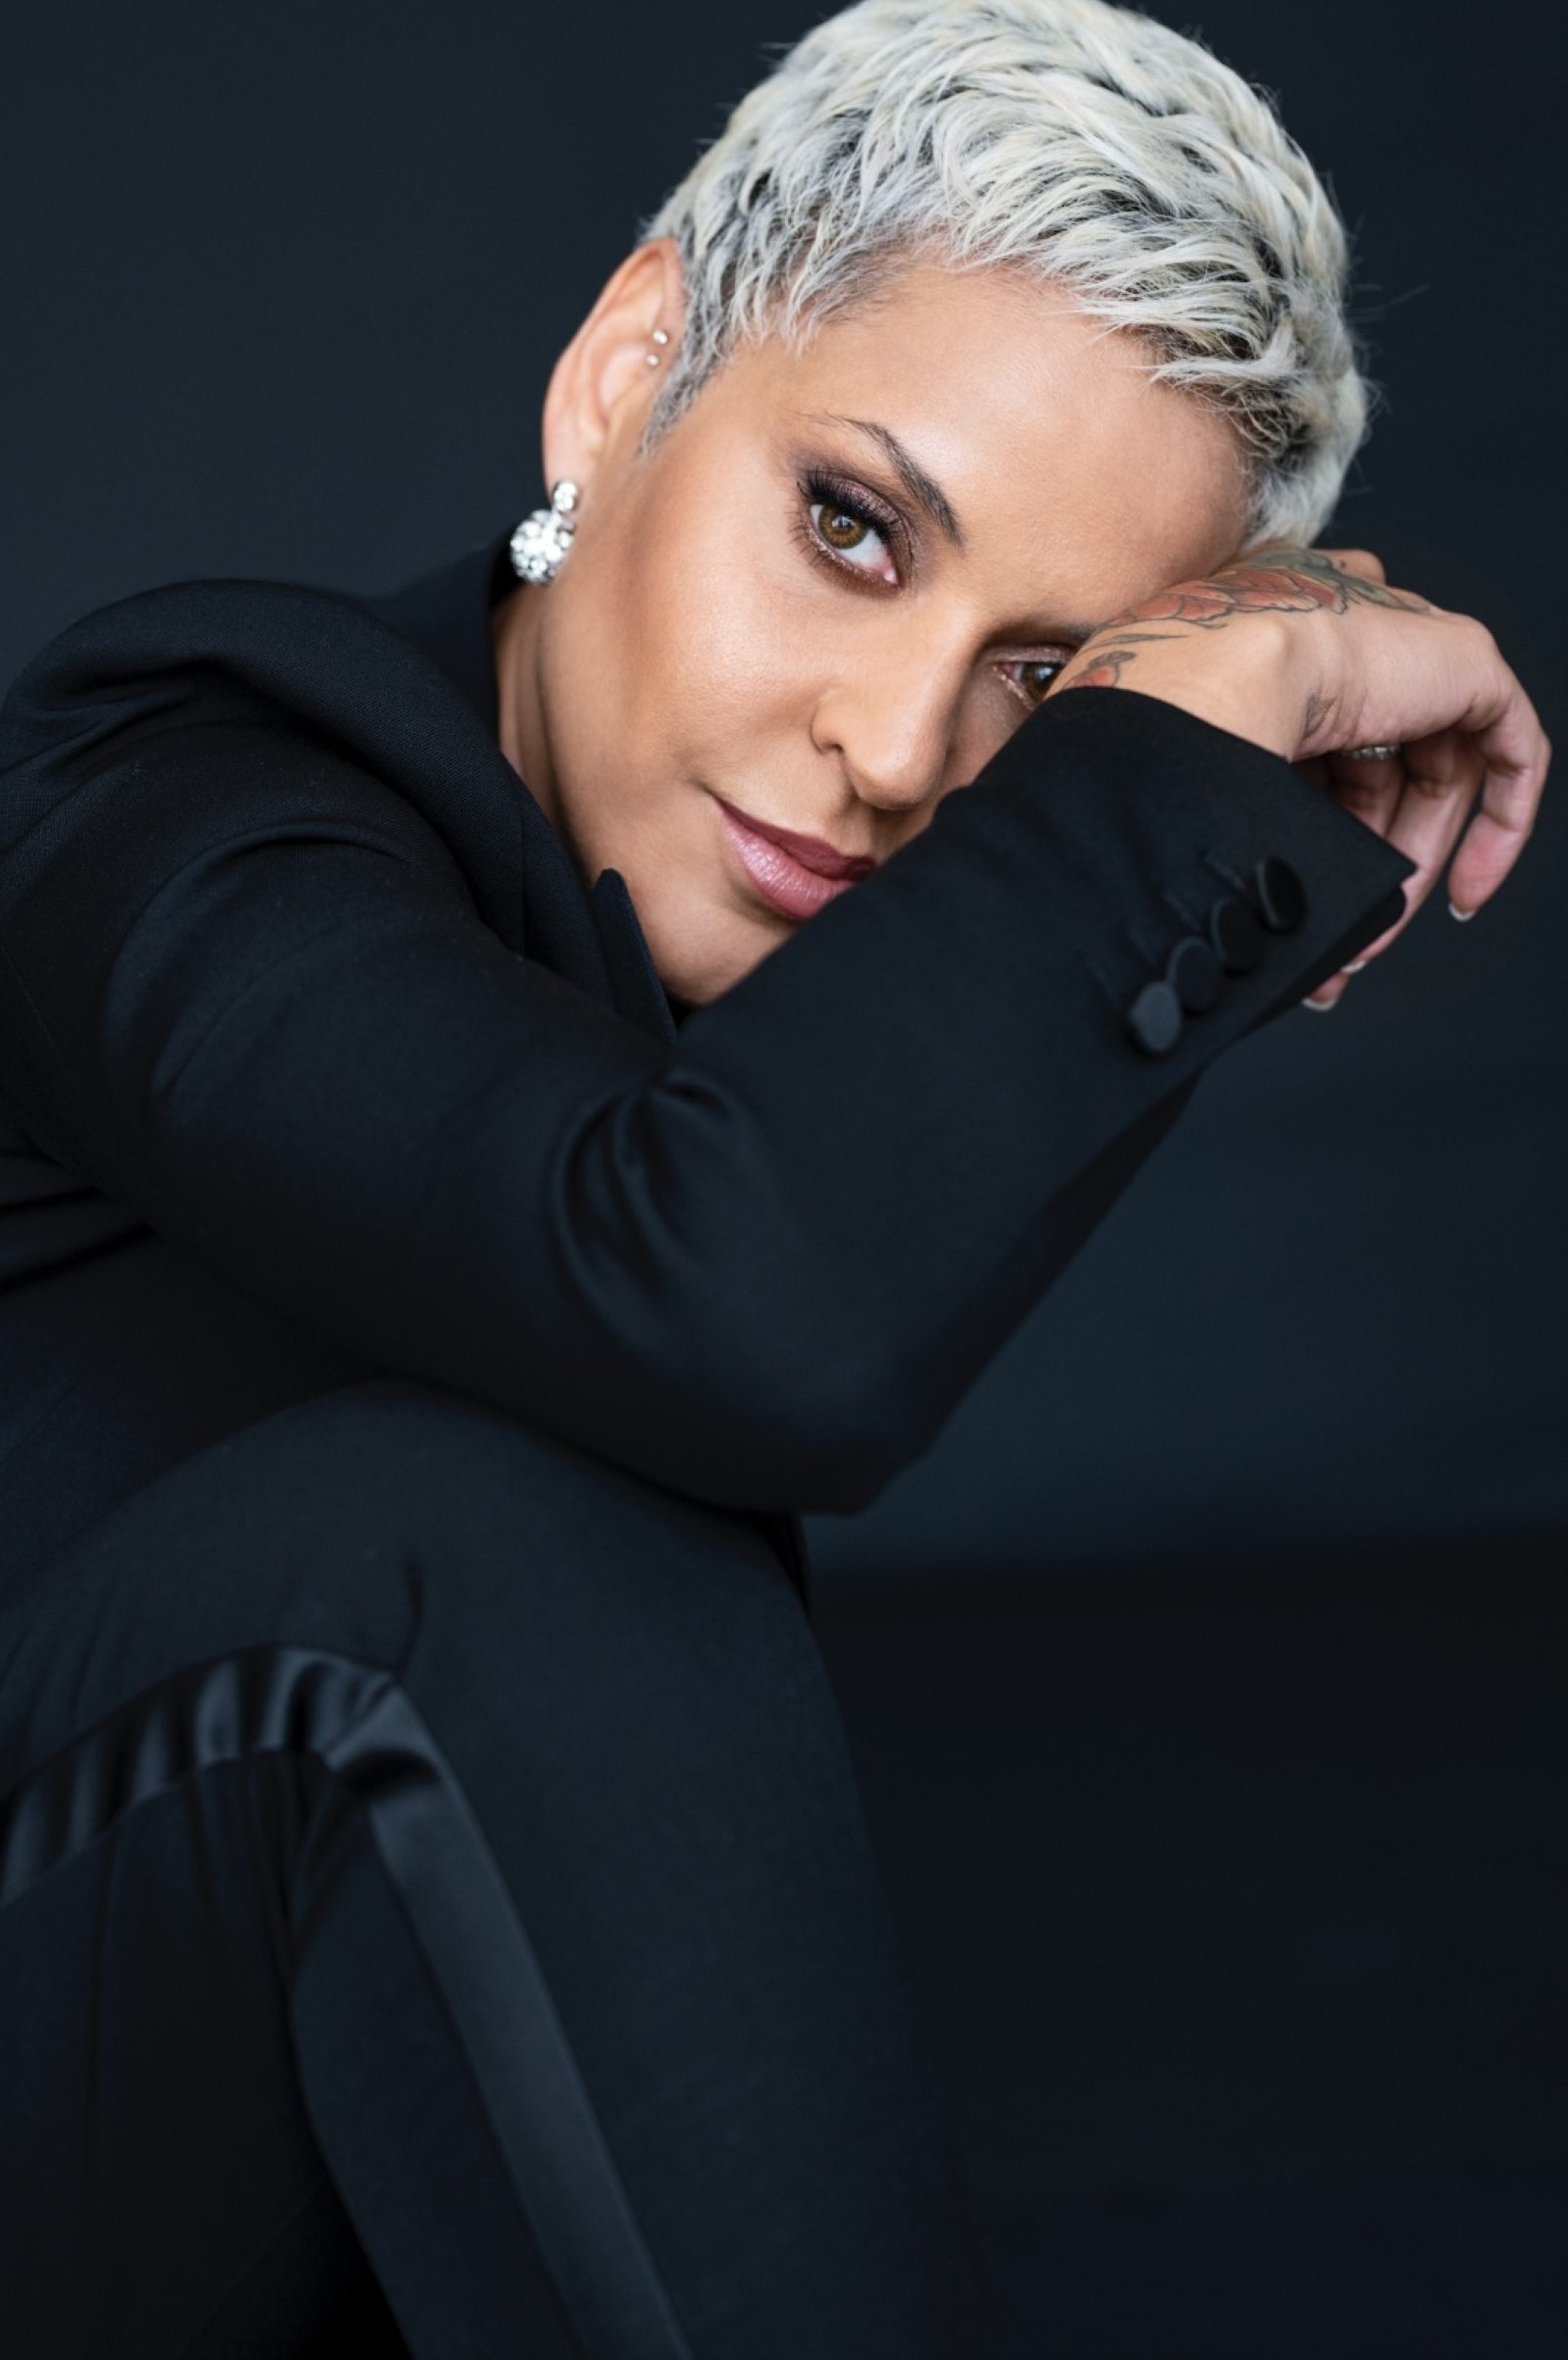 Mariza has performed for her fans in prestigious concert halls around the world on four continents.